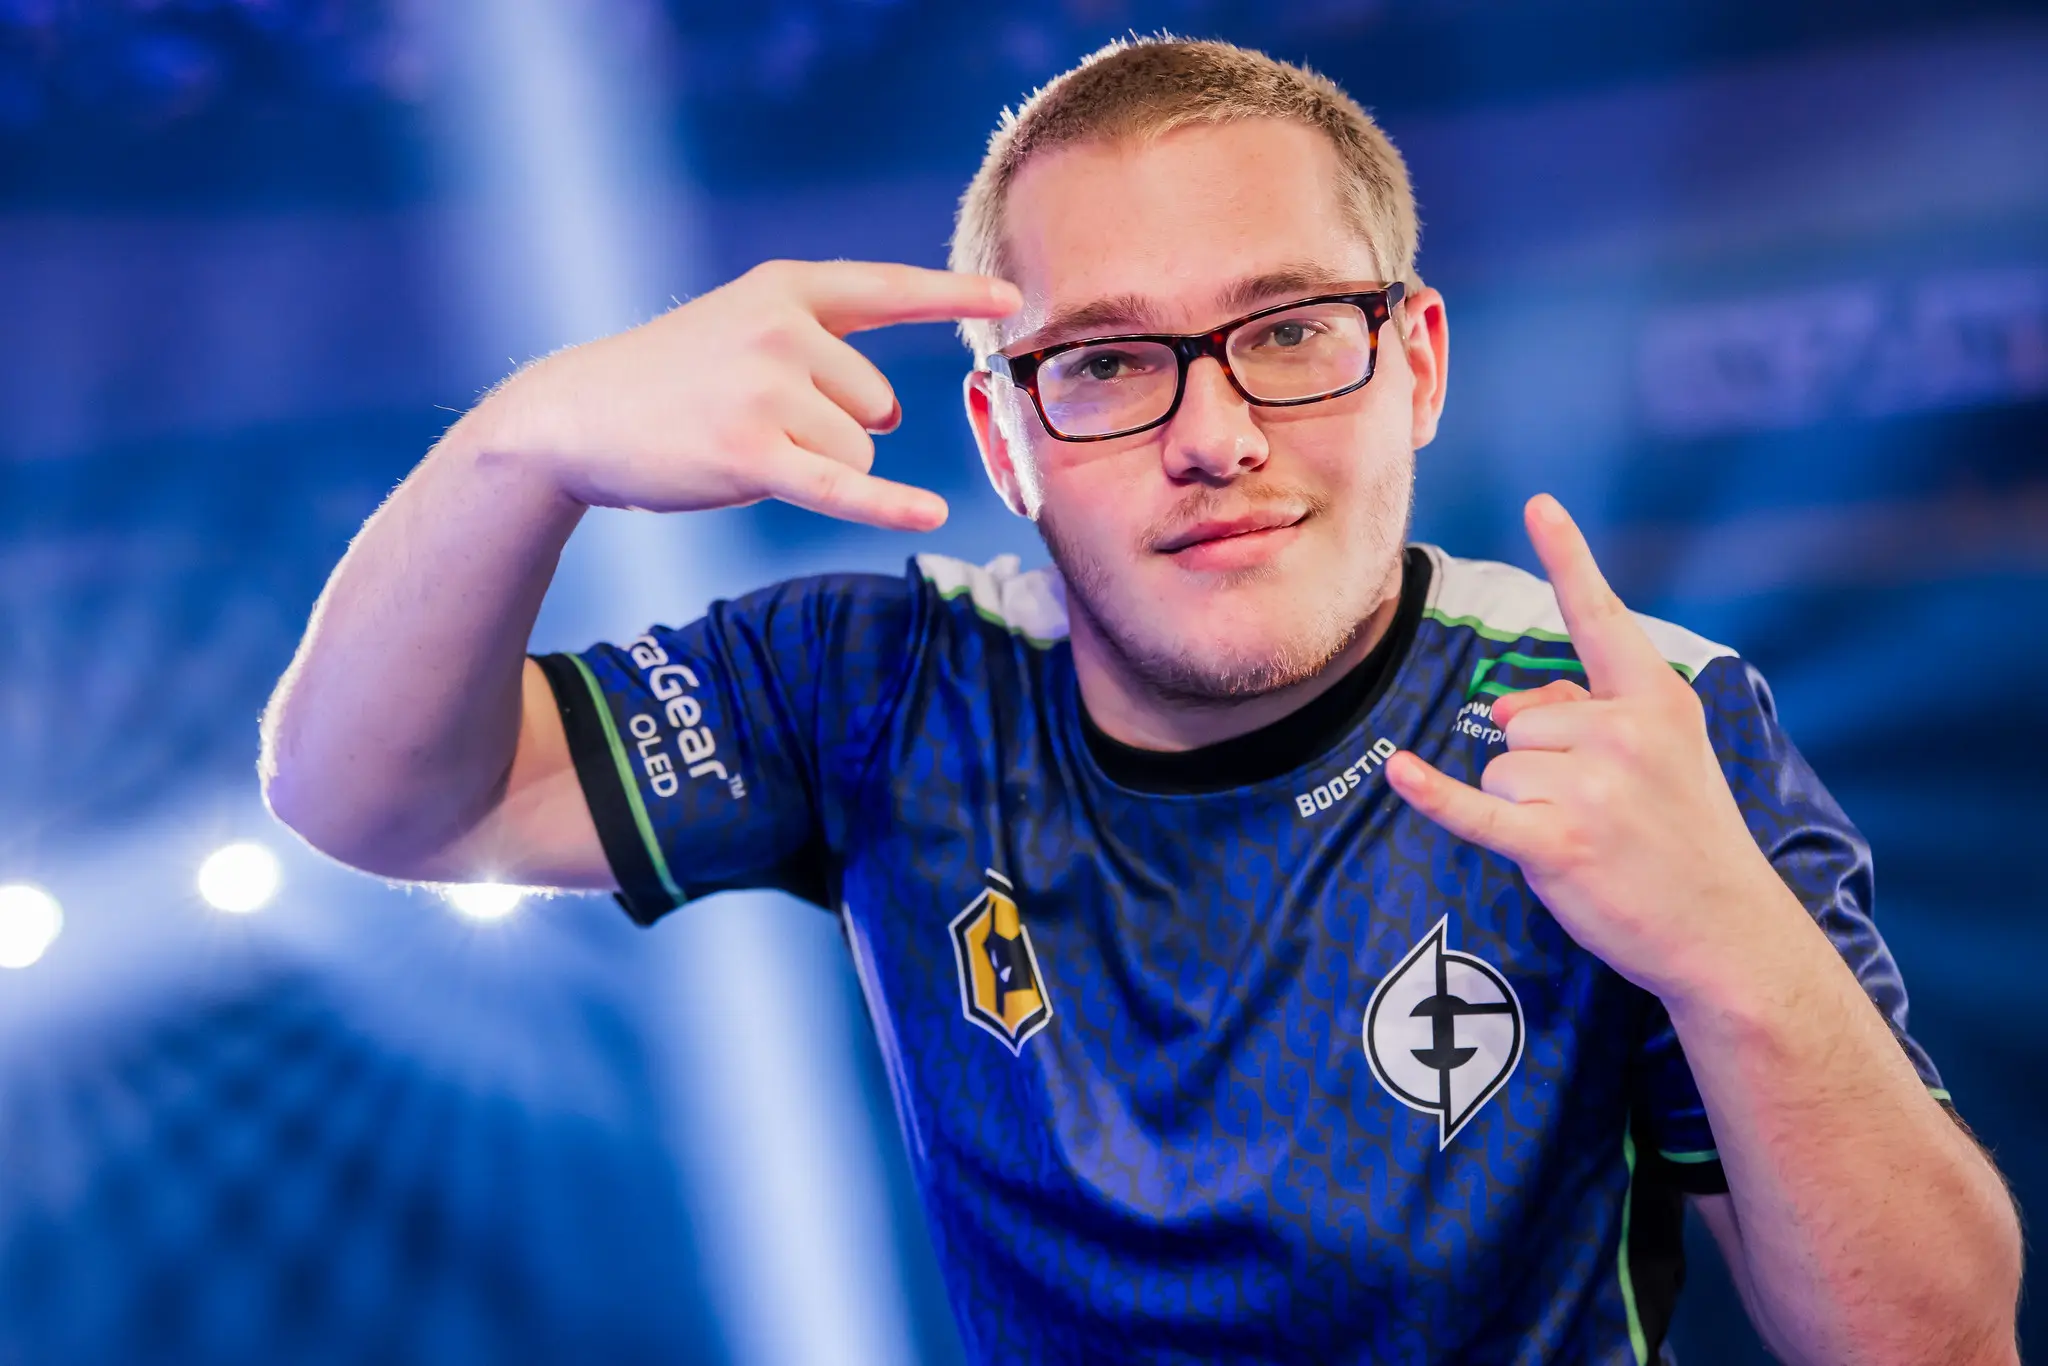 Kelden "Boostio" Pupello of Evil Geniuses poses onstage at VALORANT Masters Tokyo Brackets Stage at Tipstar Dome Chiba on June 21, 2023 in Tokyo, Japan.